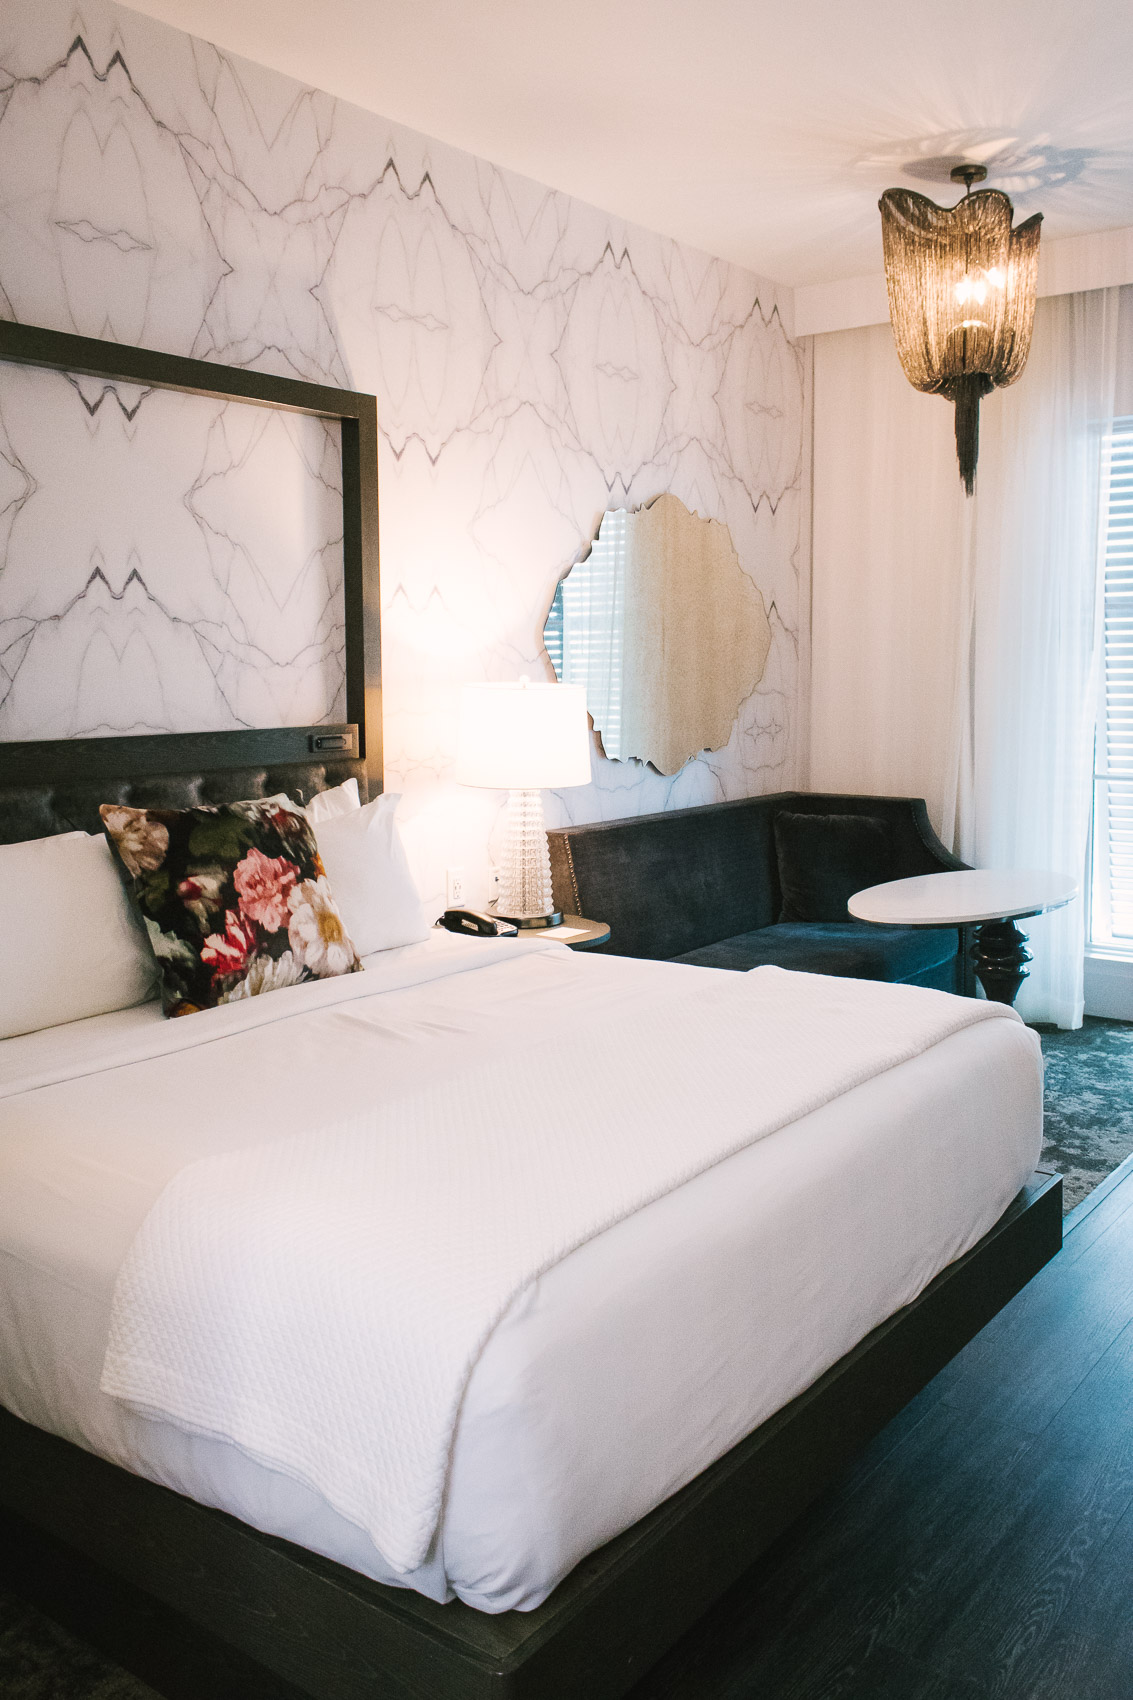 Where to stay in Charleston, SC | Edgy, romantic decor at Hotel Bella Grace - a modern boutique hotel